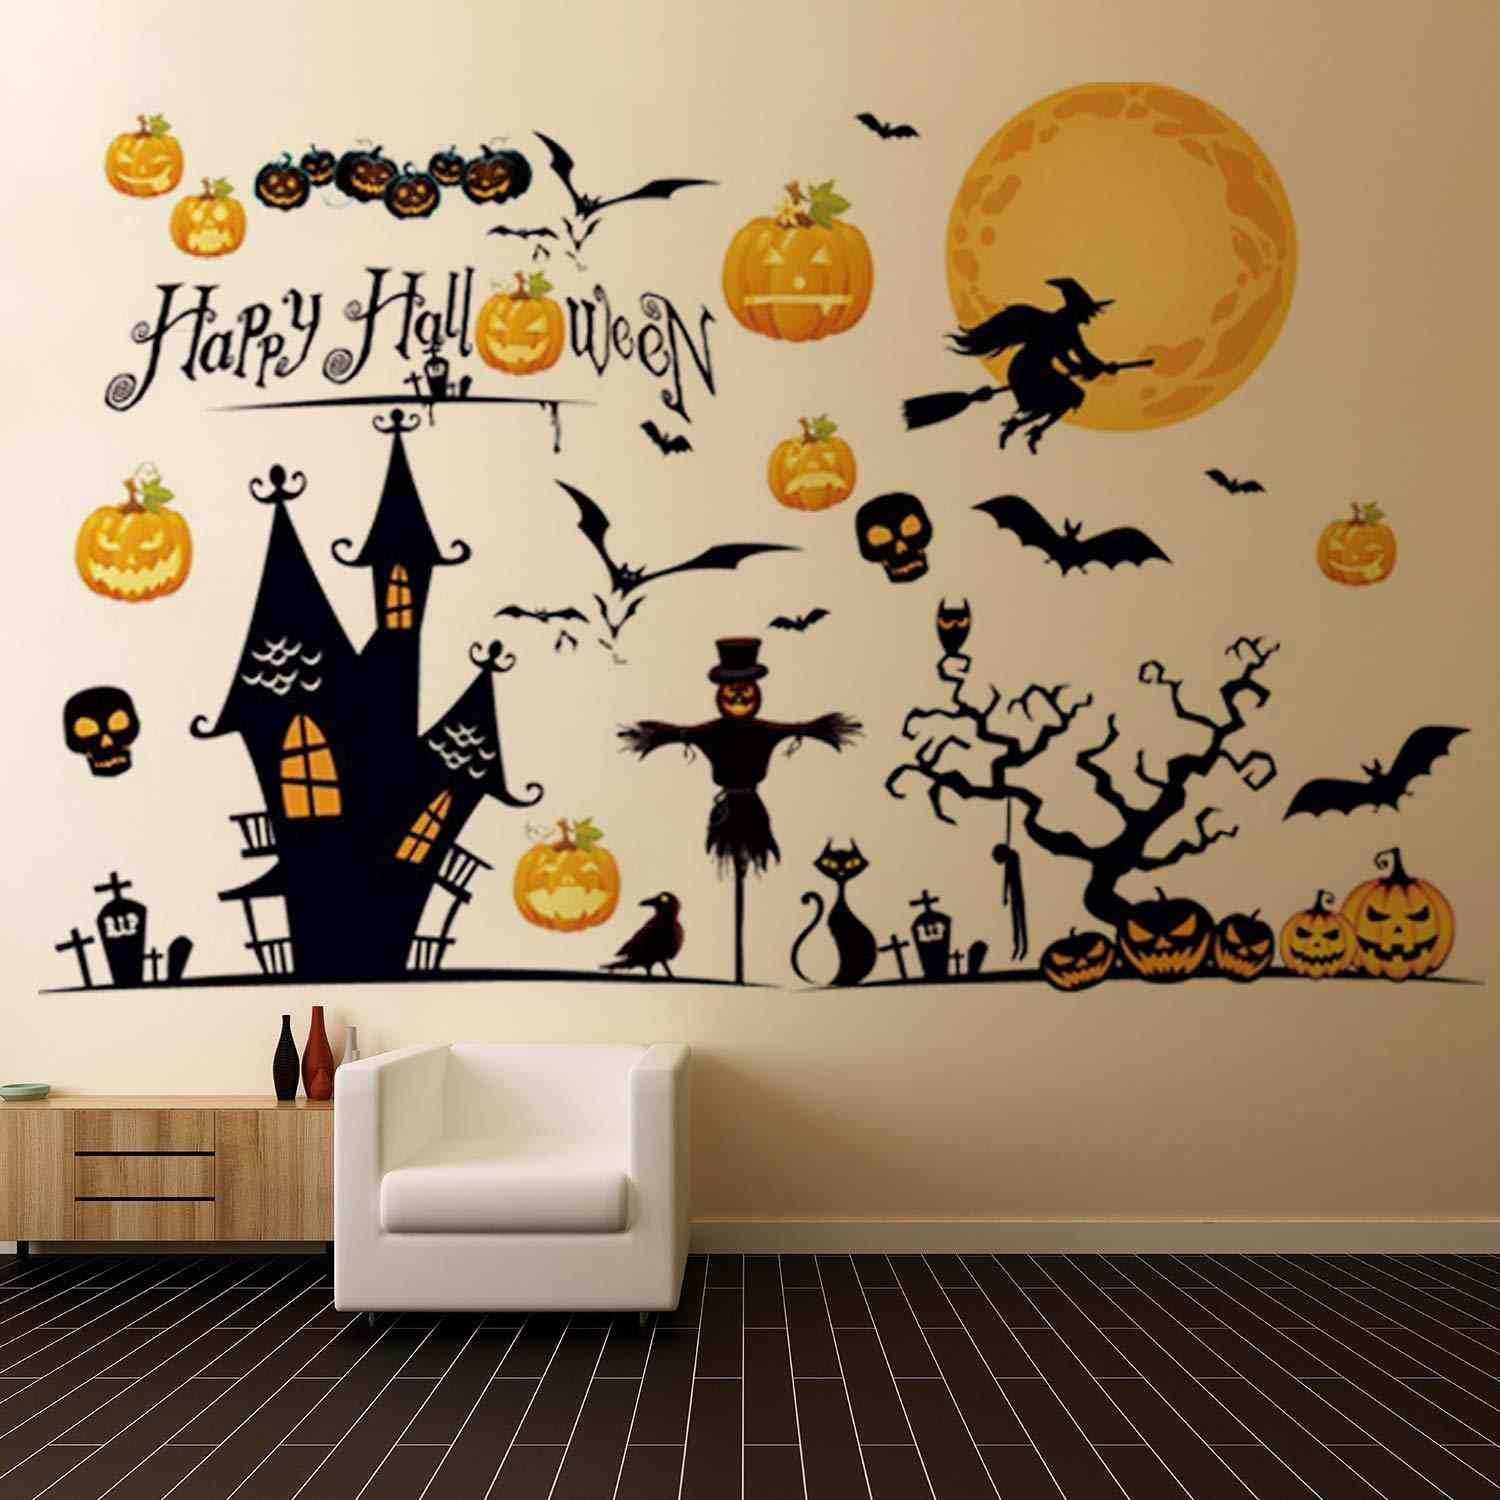 25 Best DIY Halloween Decoration Ideas to Try